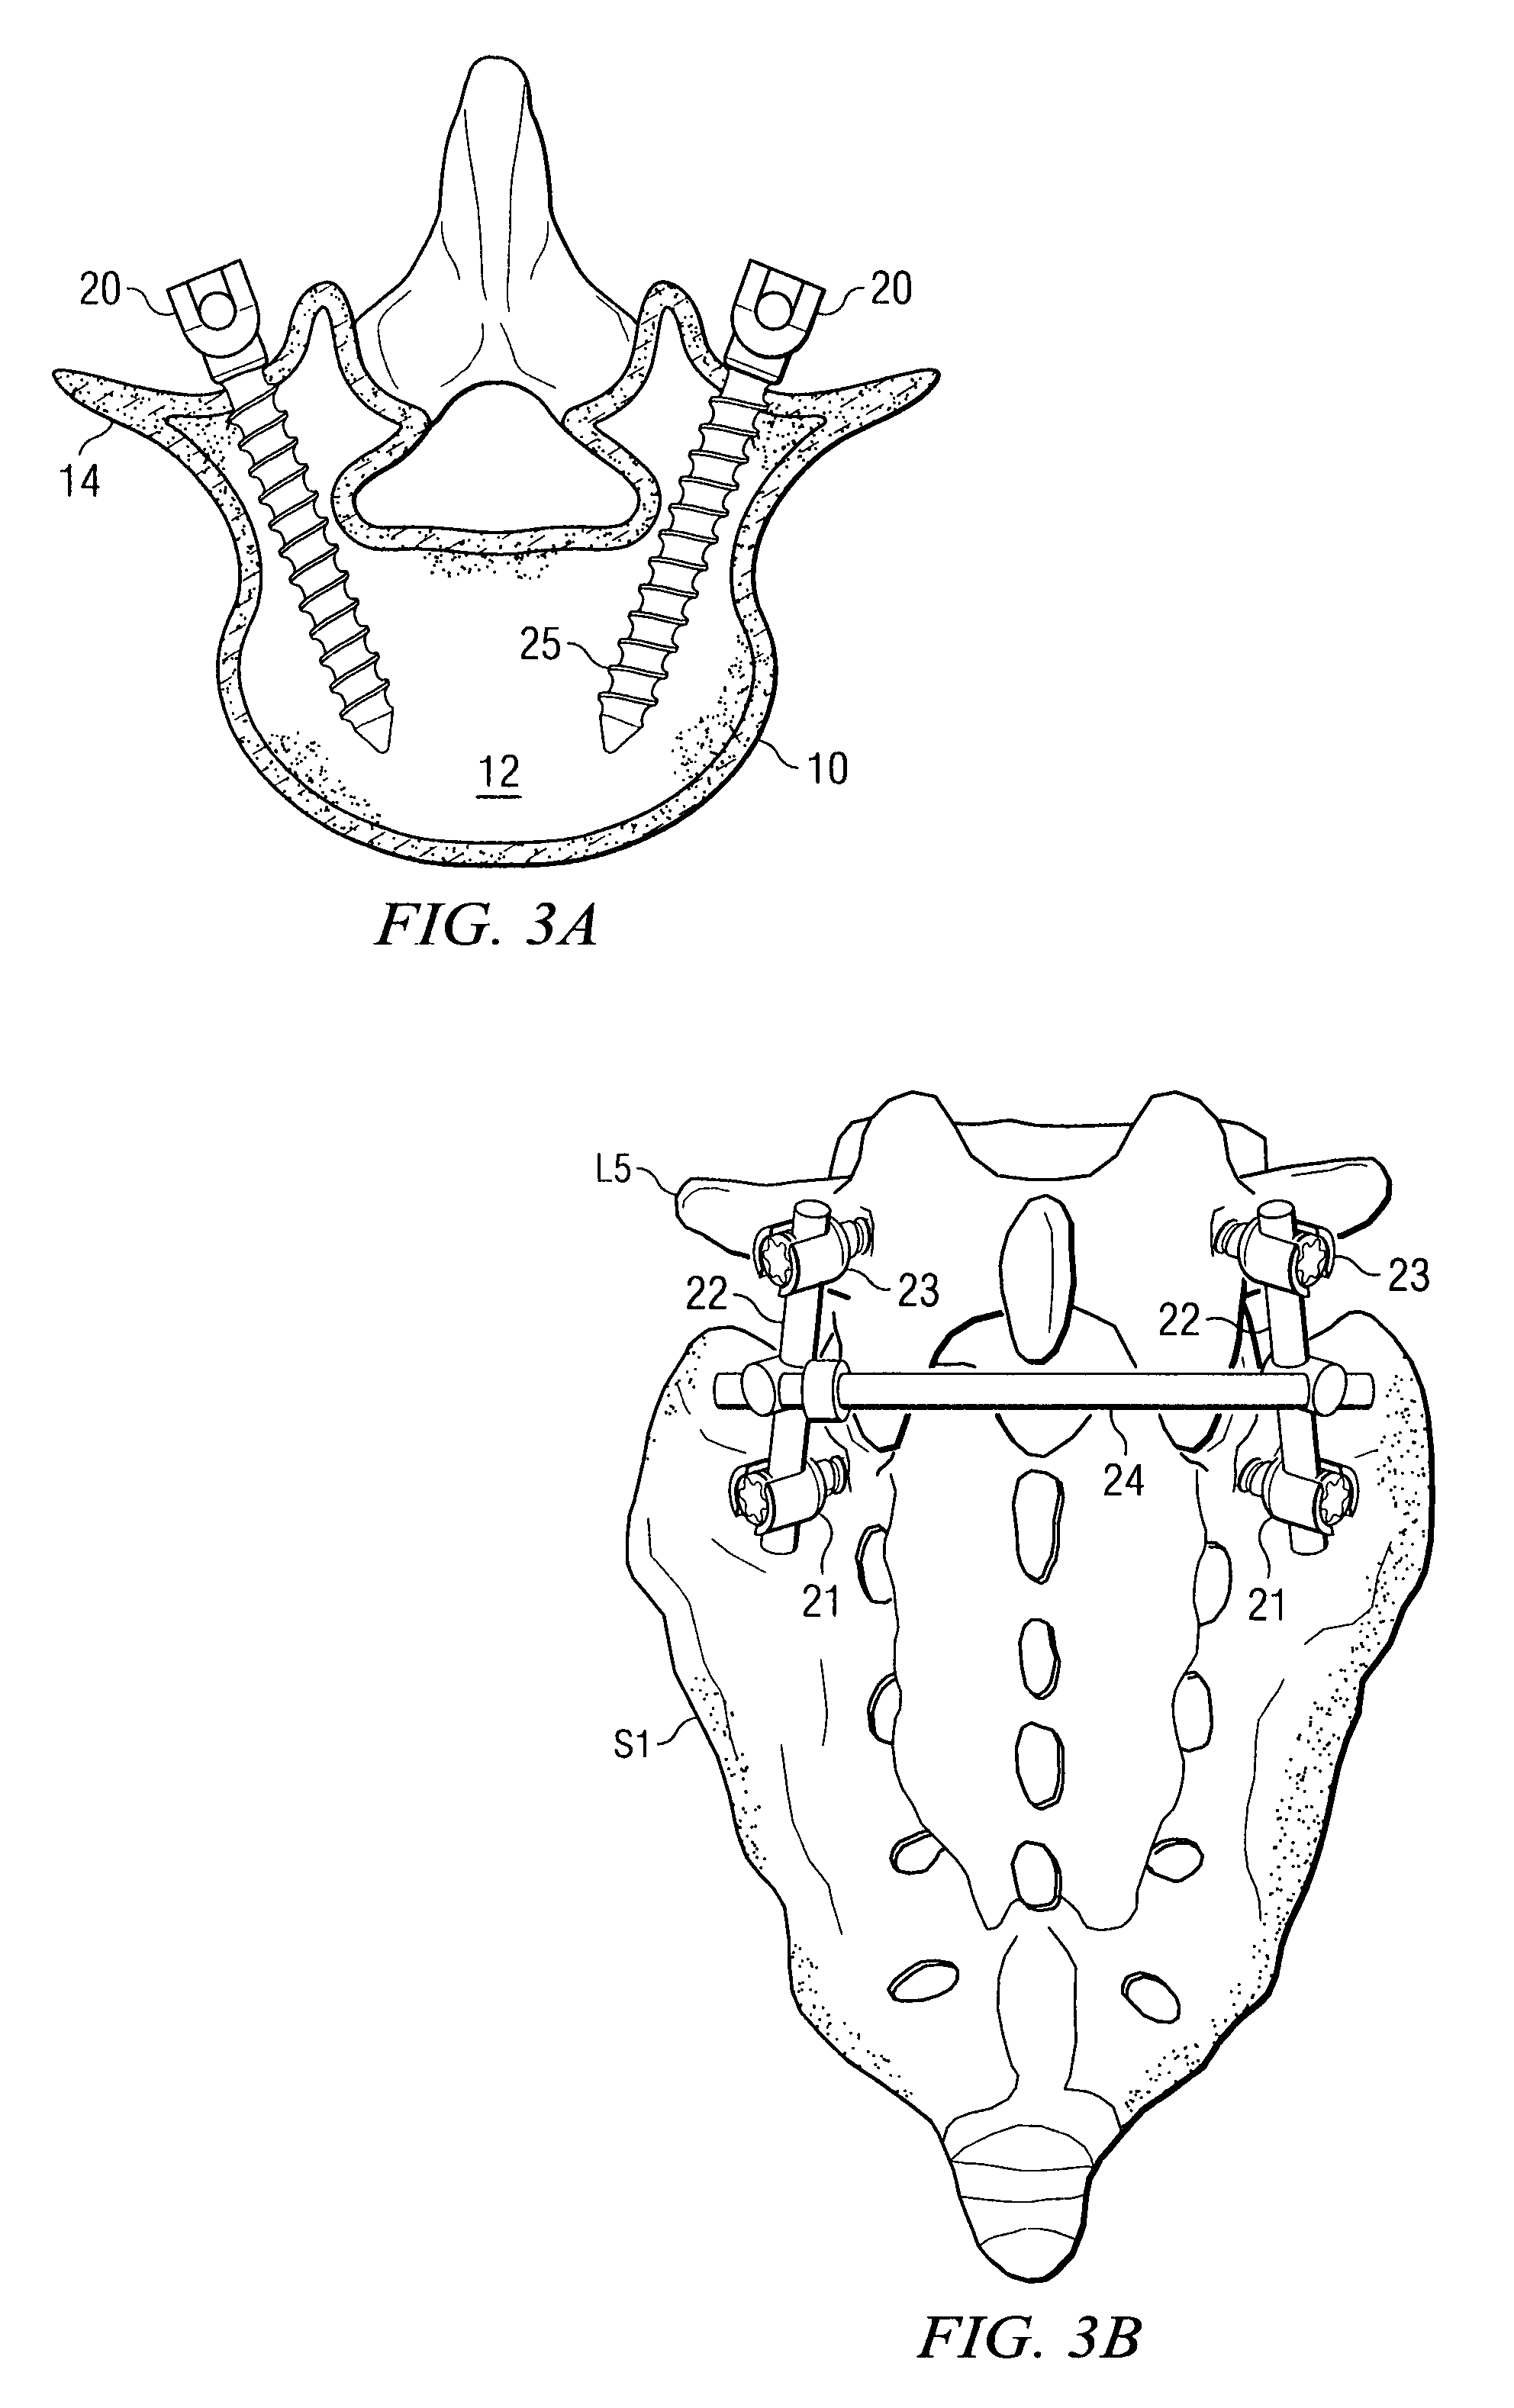 Electromagnetic apparatus and method for nerve localization during spinal surgery